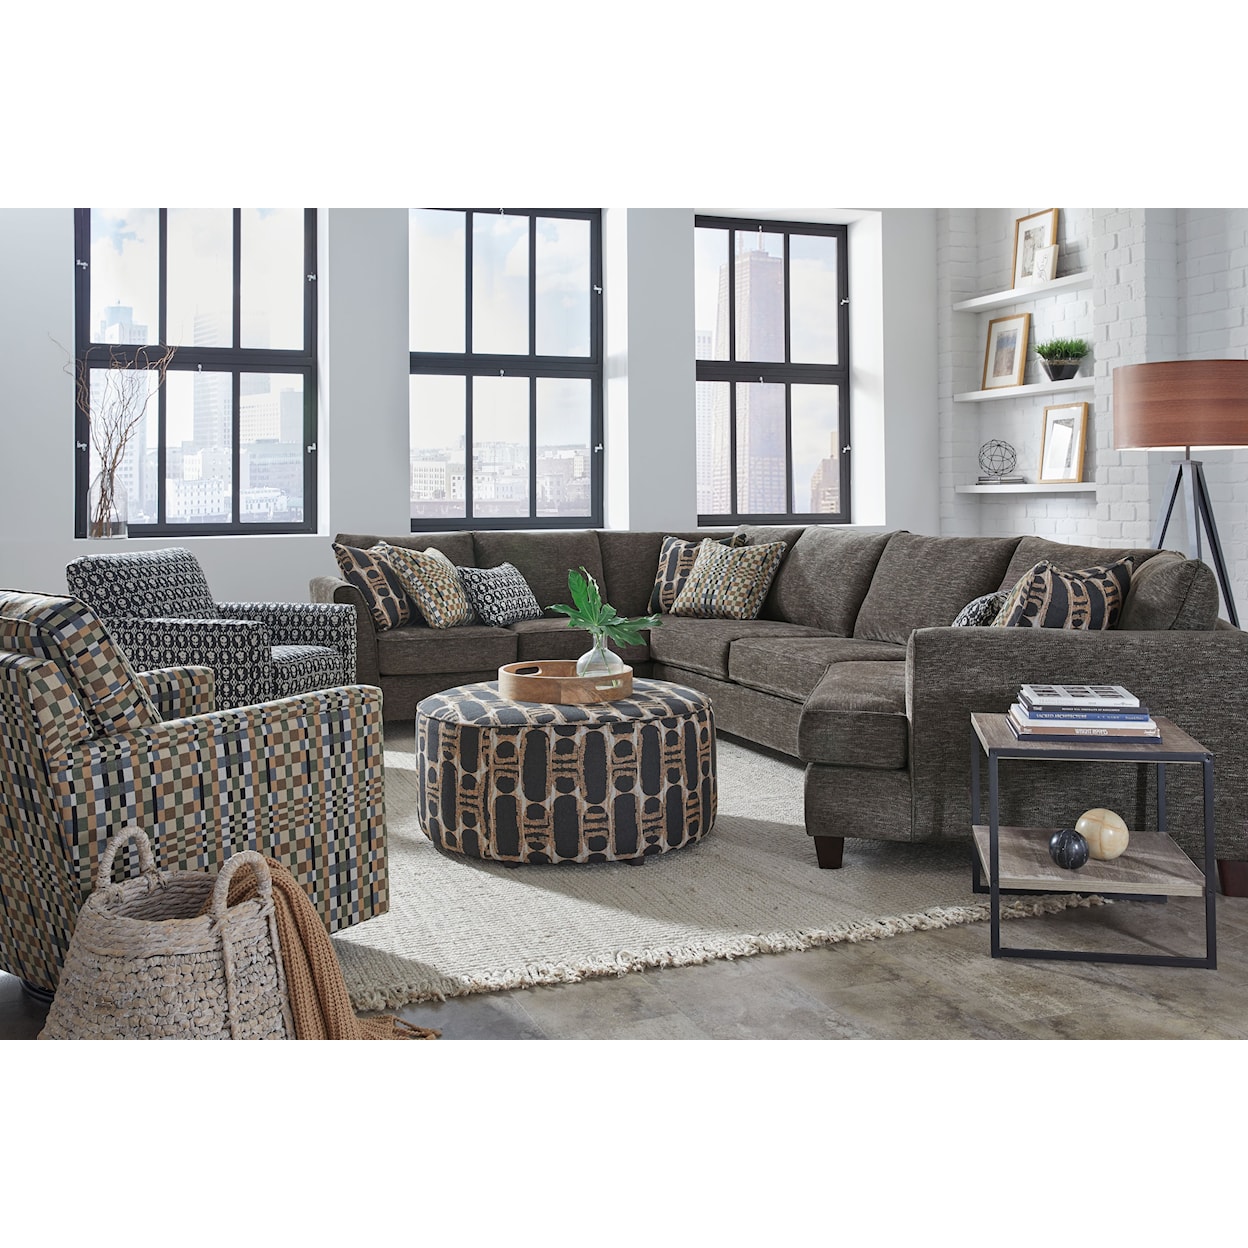 Fusion Furniture 28 MERIDA CLOVE Sectional with Cuddler